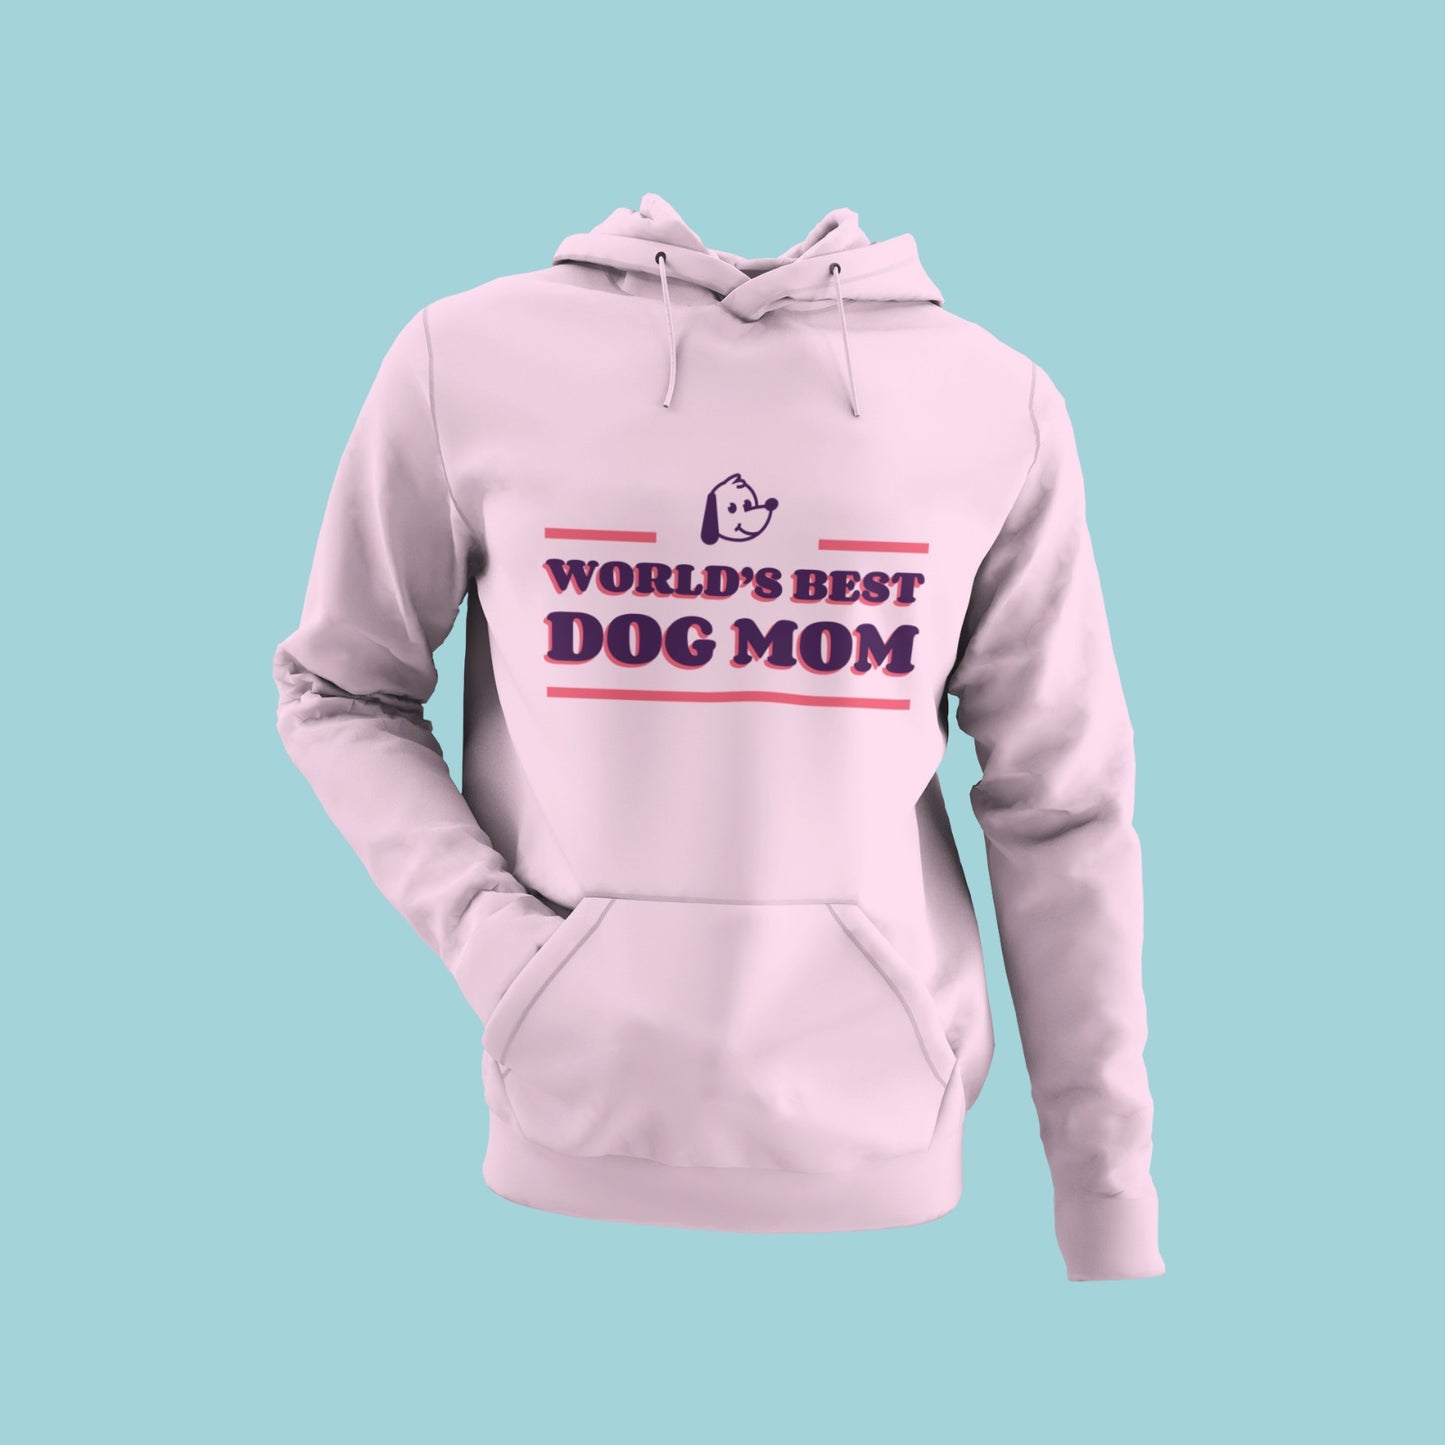 Show your love for your furry friend with our baby pink hoodie! Featuring the title 'World's Best Dog Mom' and a cute dog face image, this hoodie is perfect for all dog moms out there. Stay cozy and stylish while showing your love for your fur baby. Get yours today!